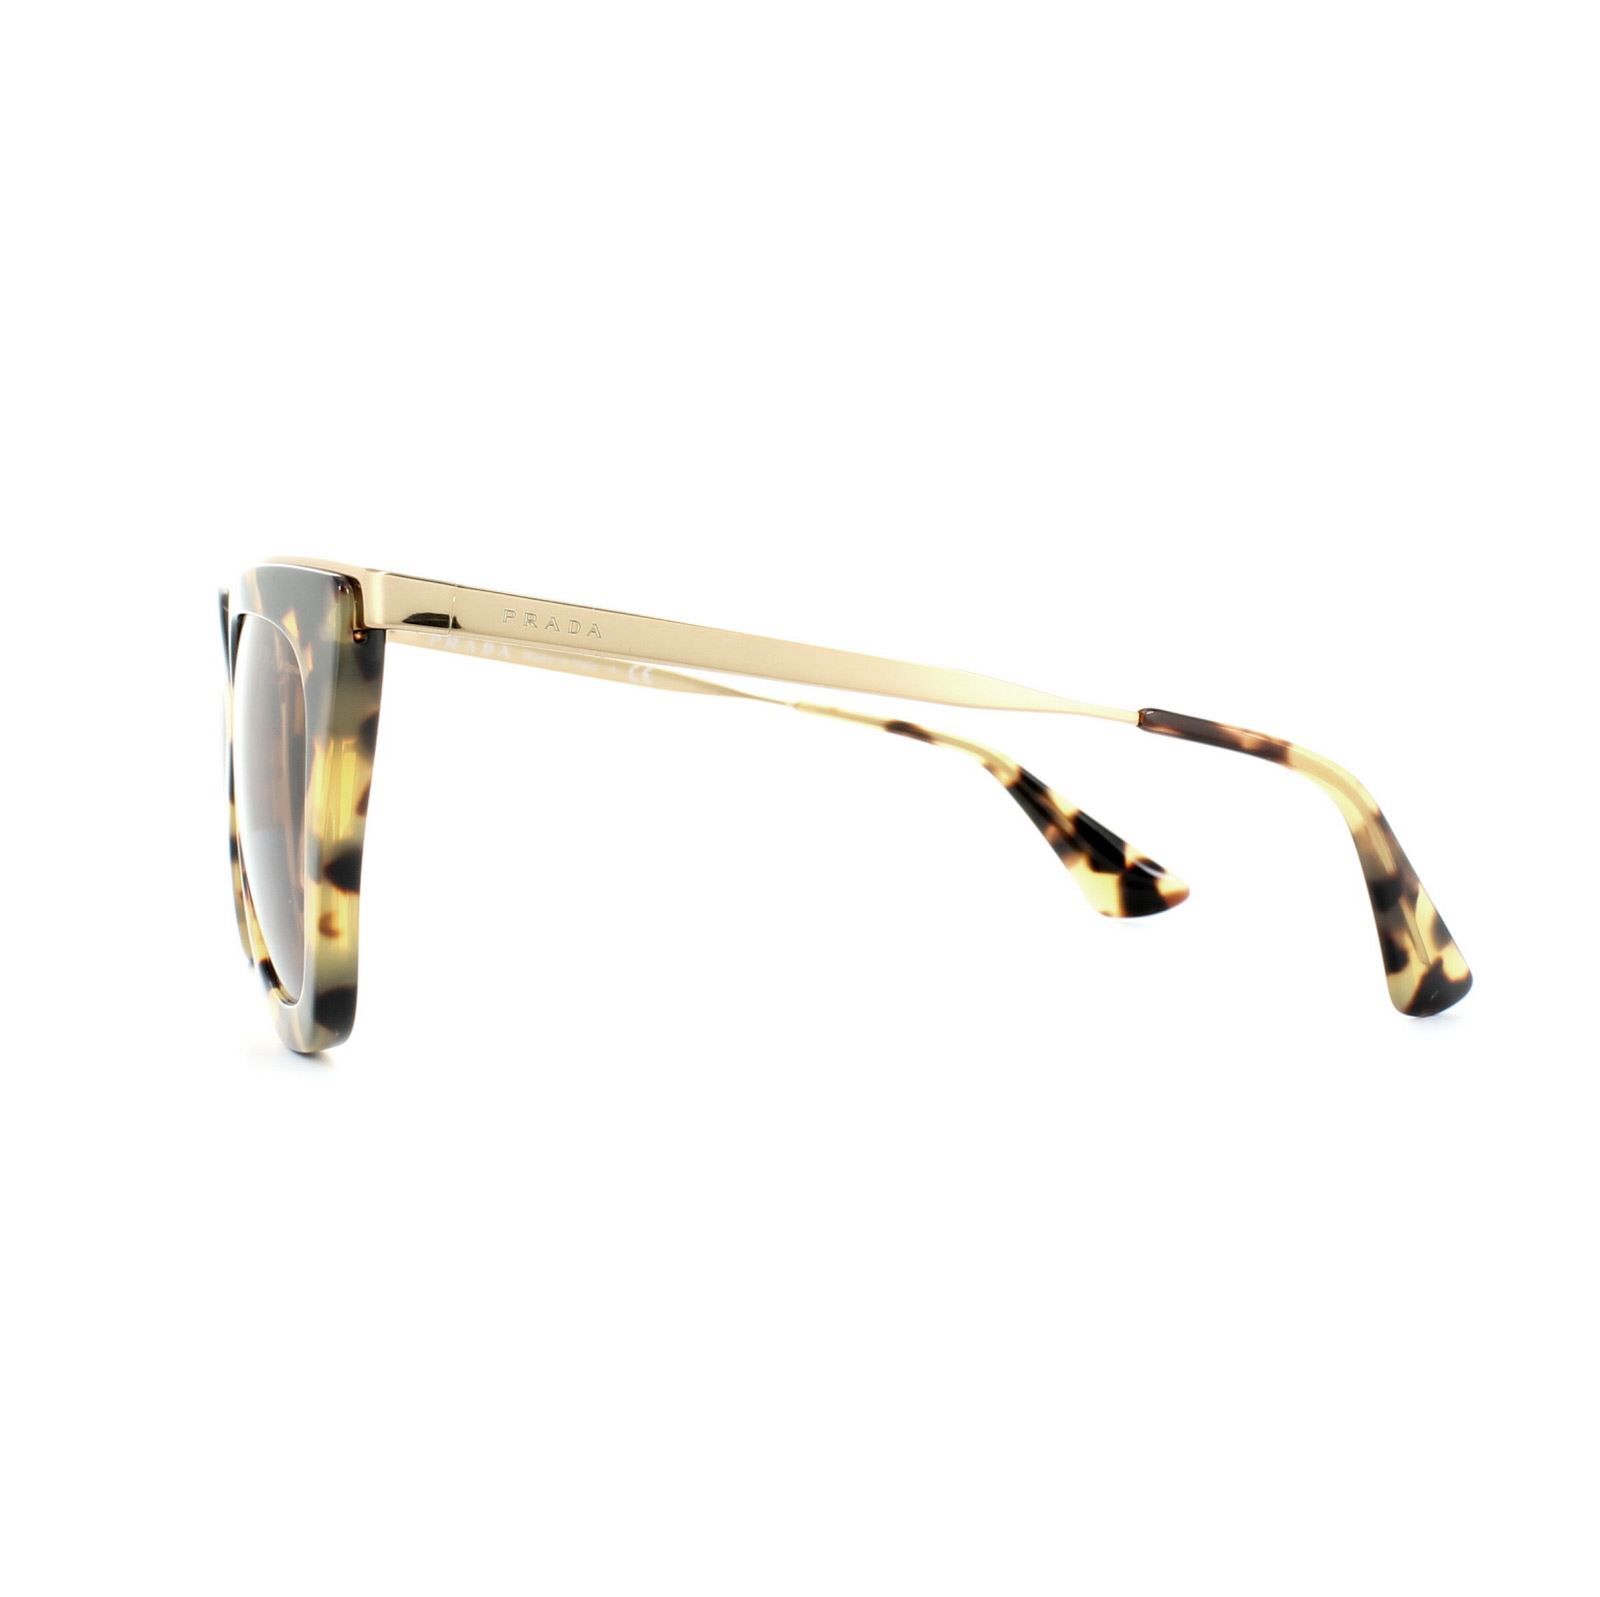 Prada Sunglasses Cinema Evolution 53SS 7S06N0 Blonde Havana Brown have a unique geometric shape with cat's eye lift to the corners, one of the frames that is leading the trend into geometric unusual shapes right now. The thick plastic front frame blends nicely at the cat's eye corners into the metal arms with the metal continuing across the top of the frame and across the bridge in one smooth piece that heightens the luxury feel of the frame.